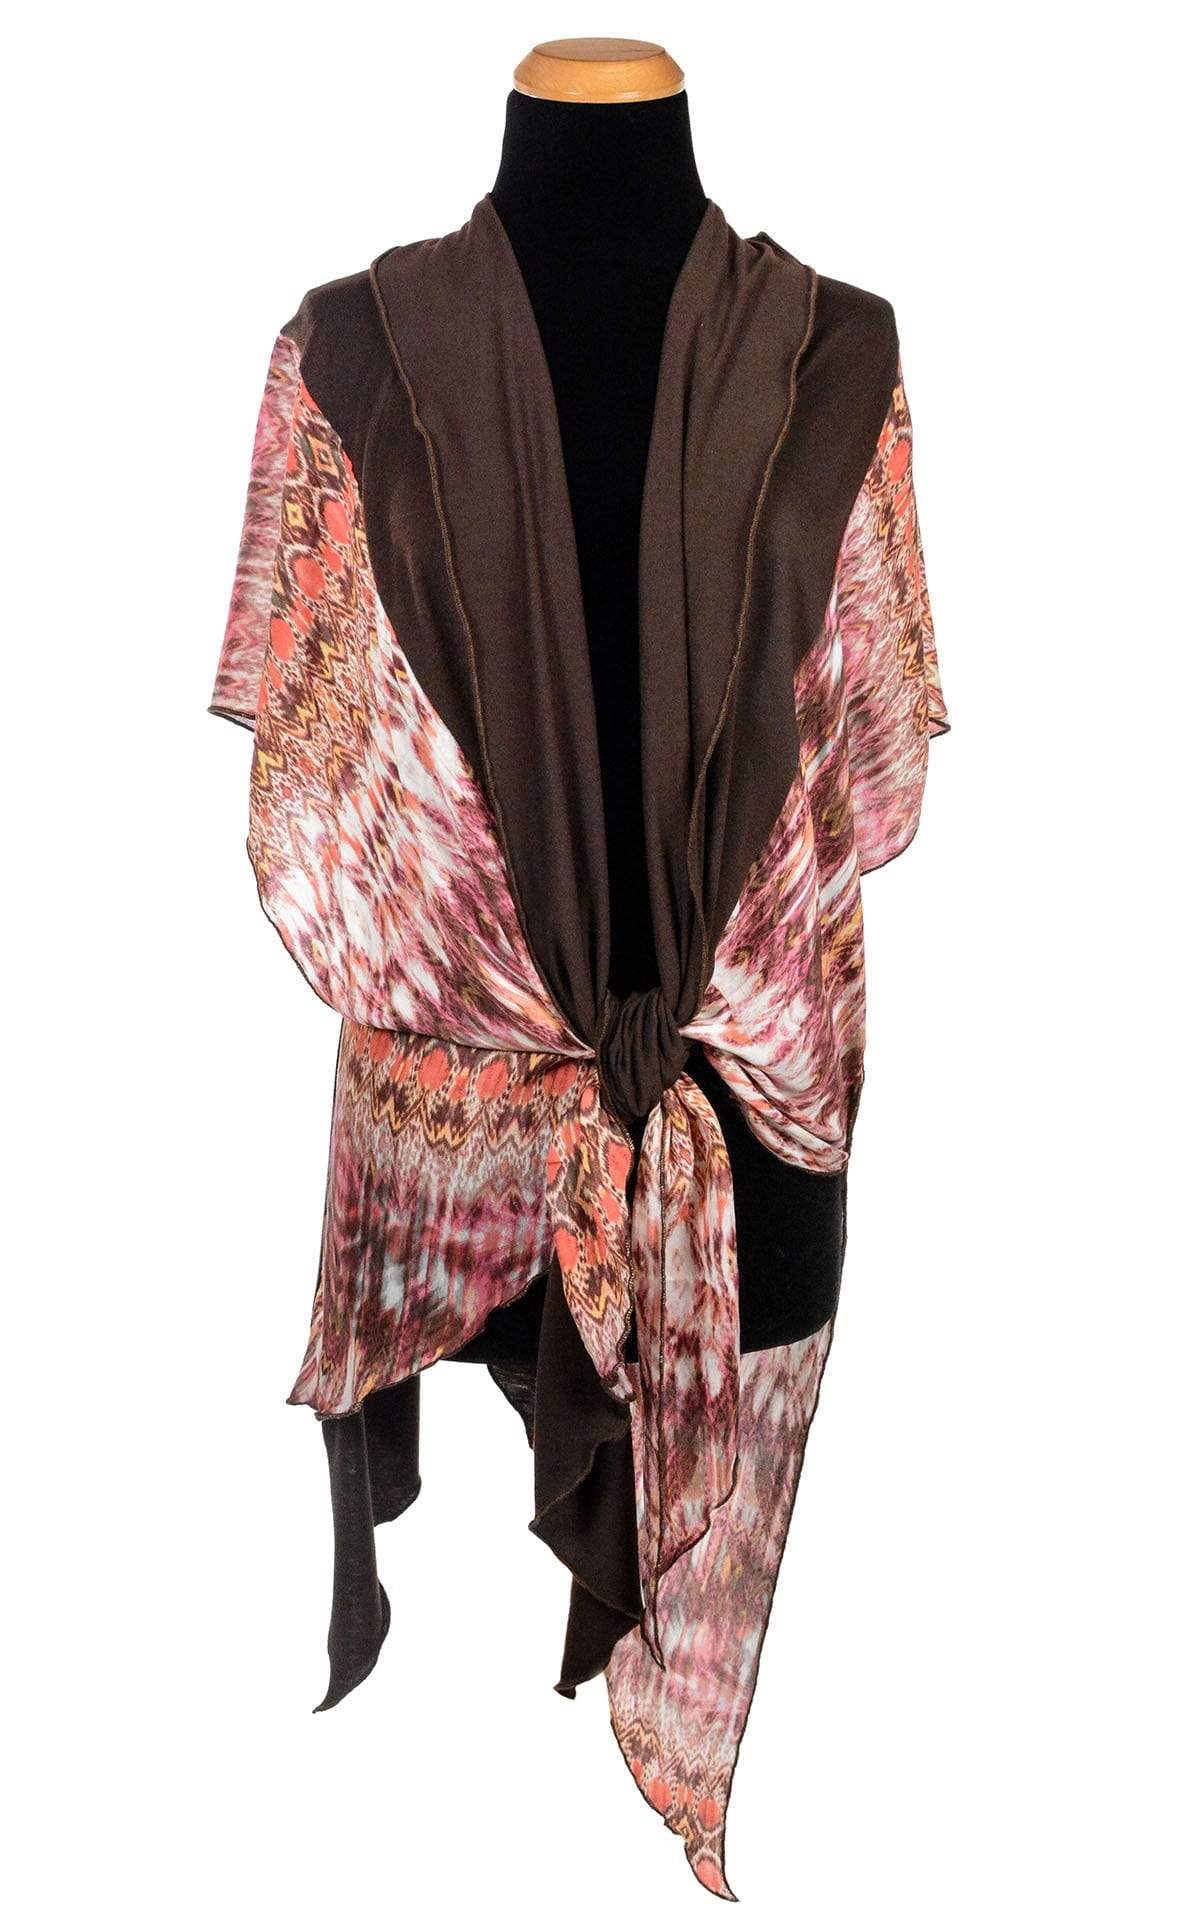 Kaftan Cover Up Tied View - Pink Dream with Terra Jersey Knit Apparel | Handmade by Pandemonium Millinery